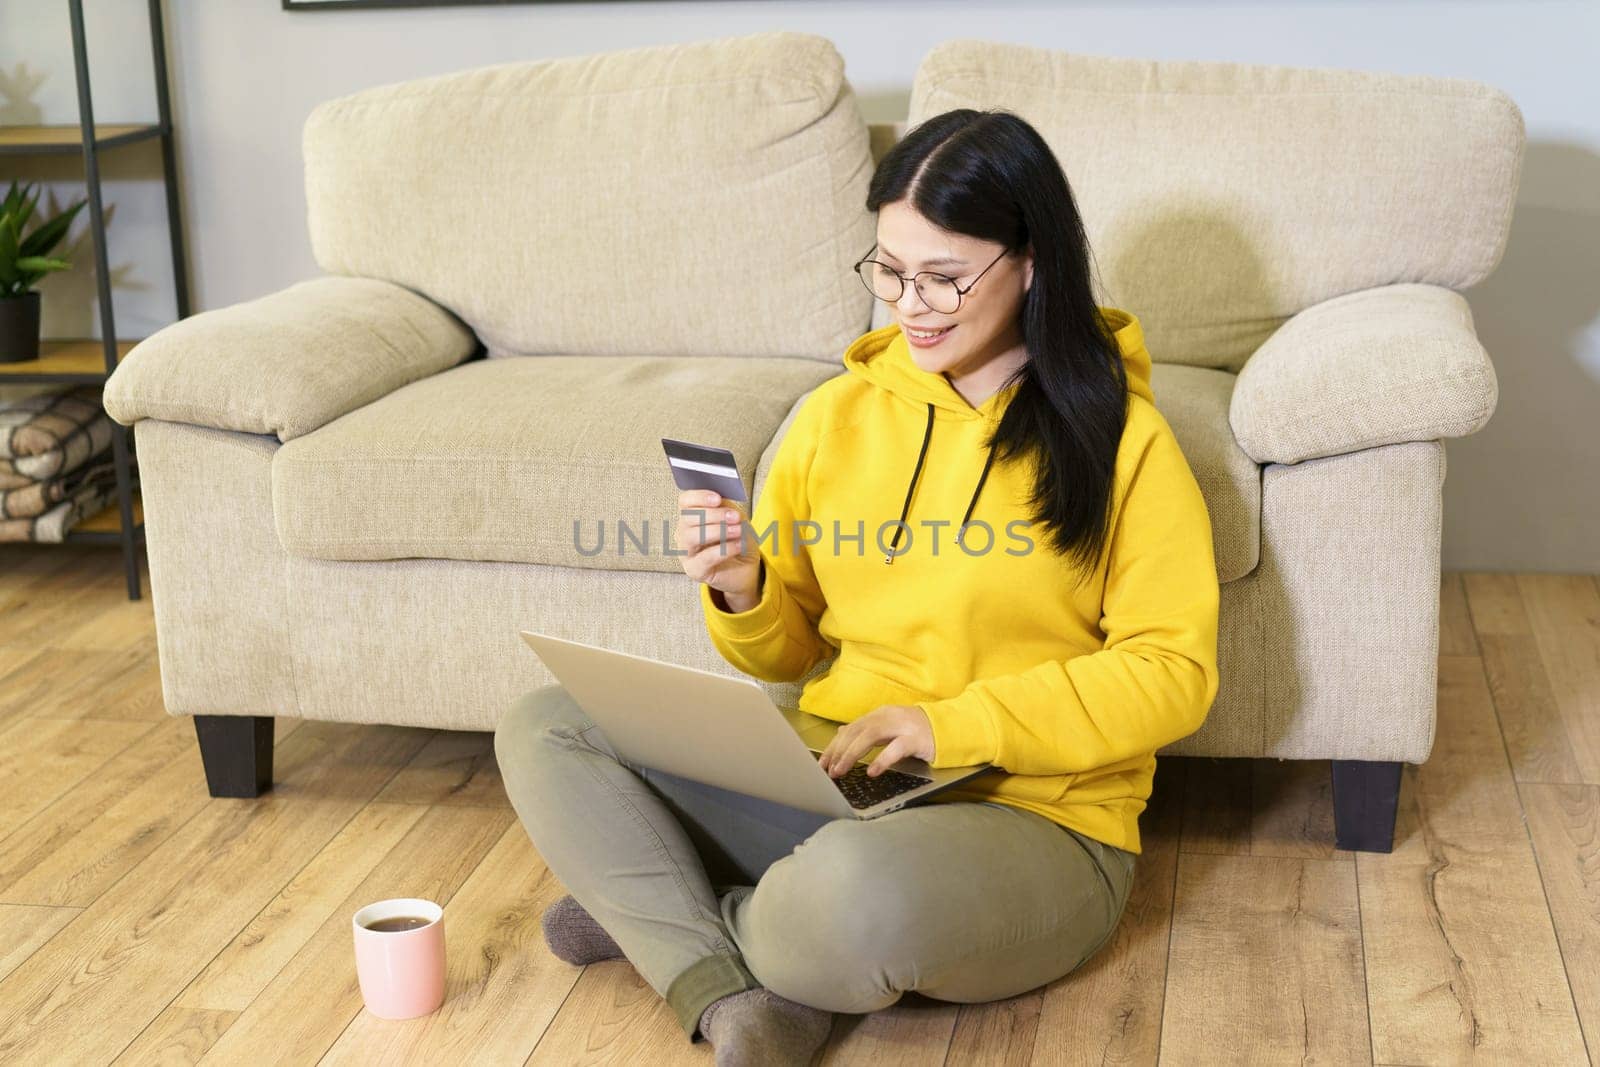 Mature Asian woman wearing glasses is sitting comfortably on floor with laptop, holding bankcard, and cup of coffee. She is engaged in digital work, enjoying moment of relaxation with her favorite beverage while working from home. High quality photo